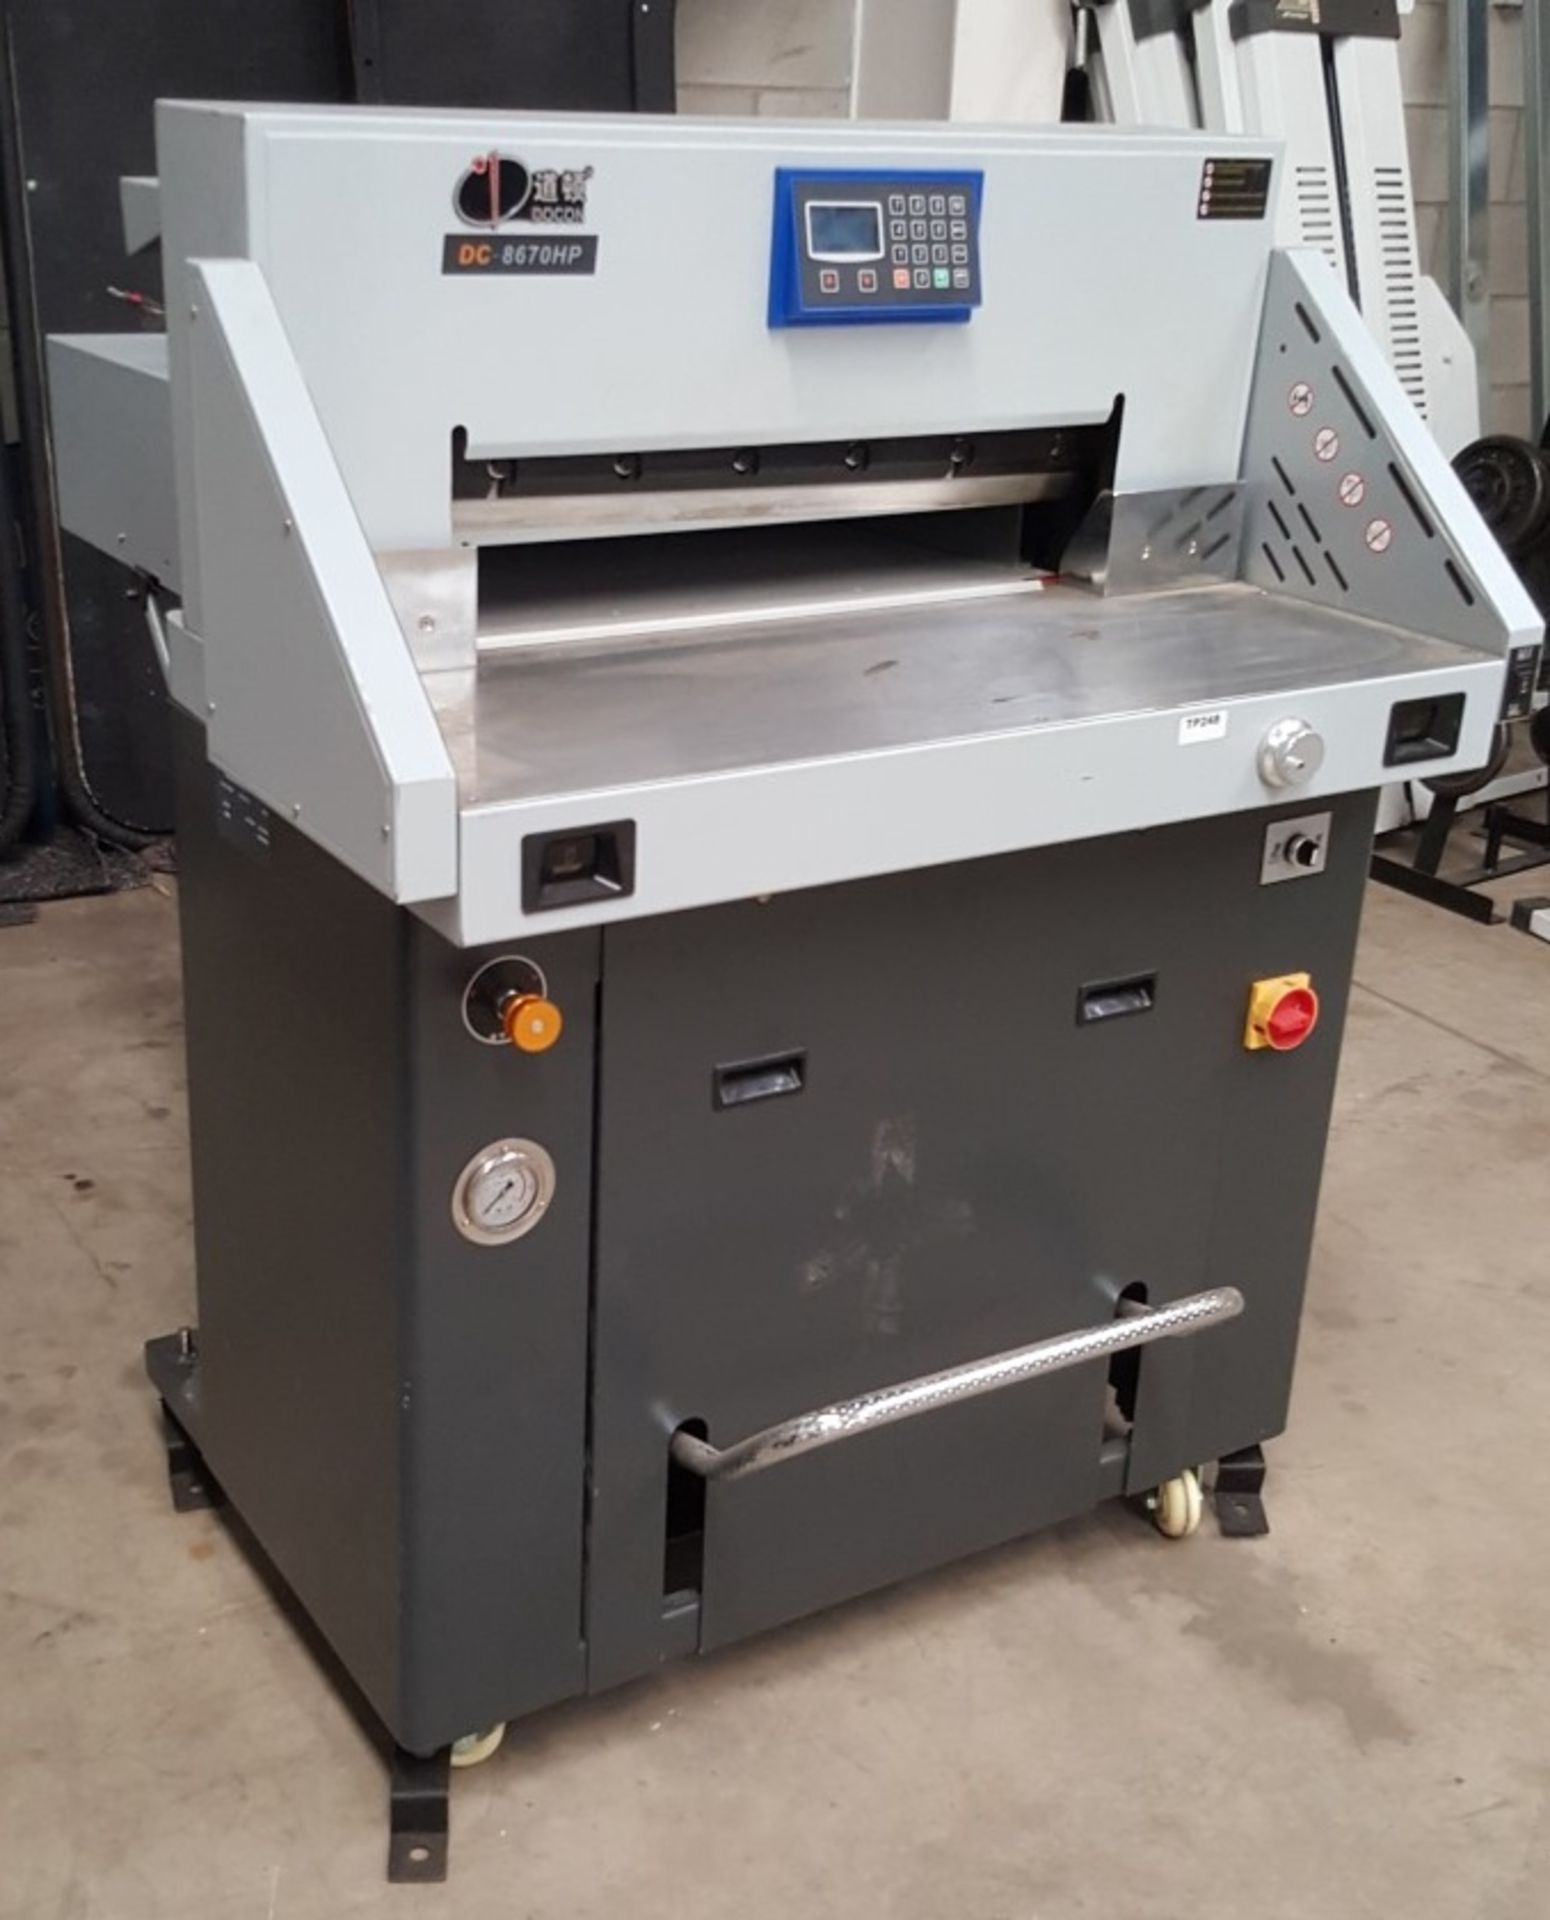 1 x Docon DC-8670HP Hydraulic Paper Guillotine - Heavy Duty Paper Cutting Machine - Image 10 of 10